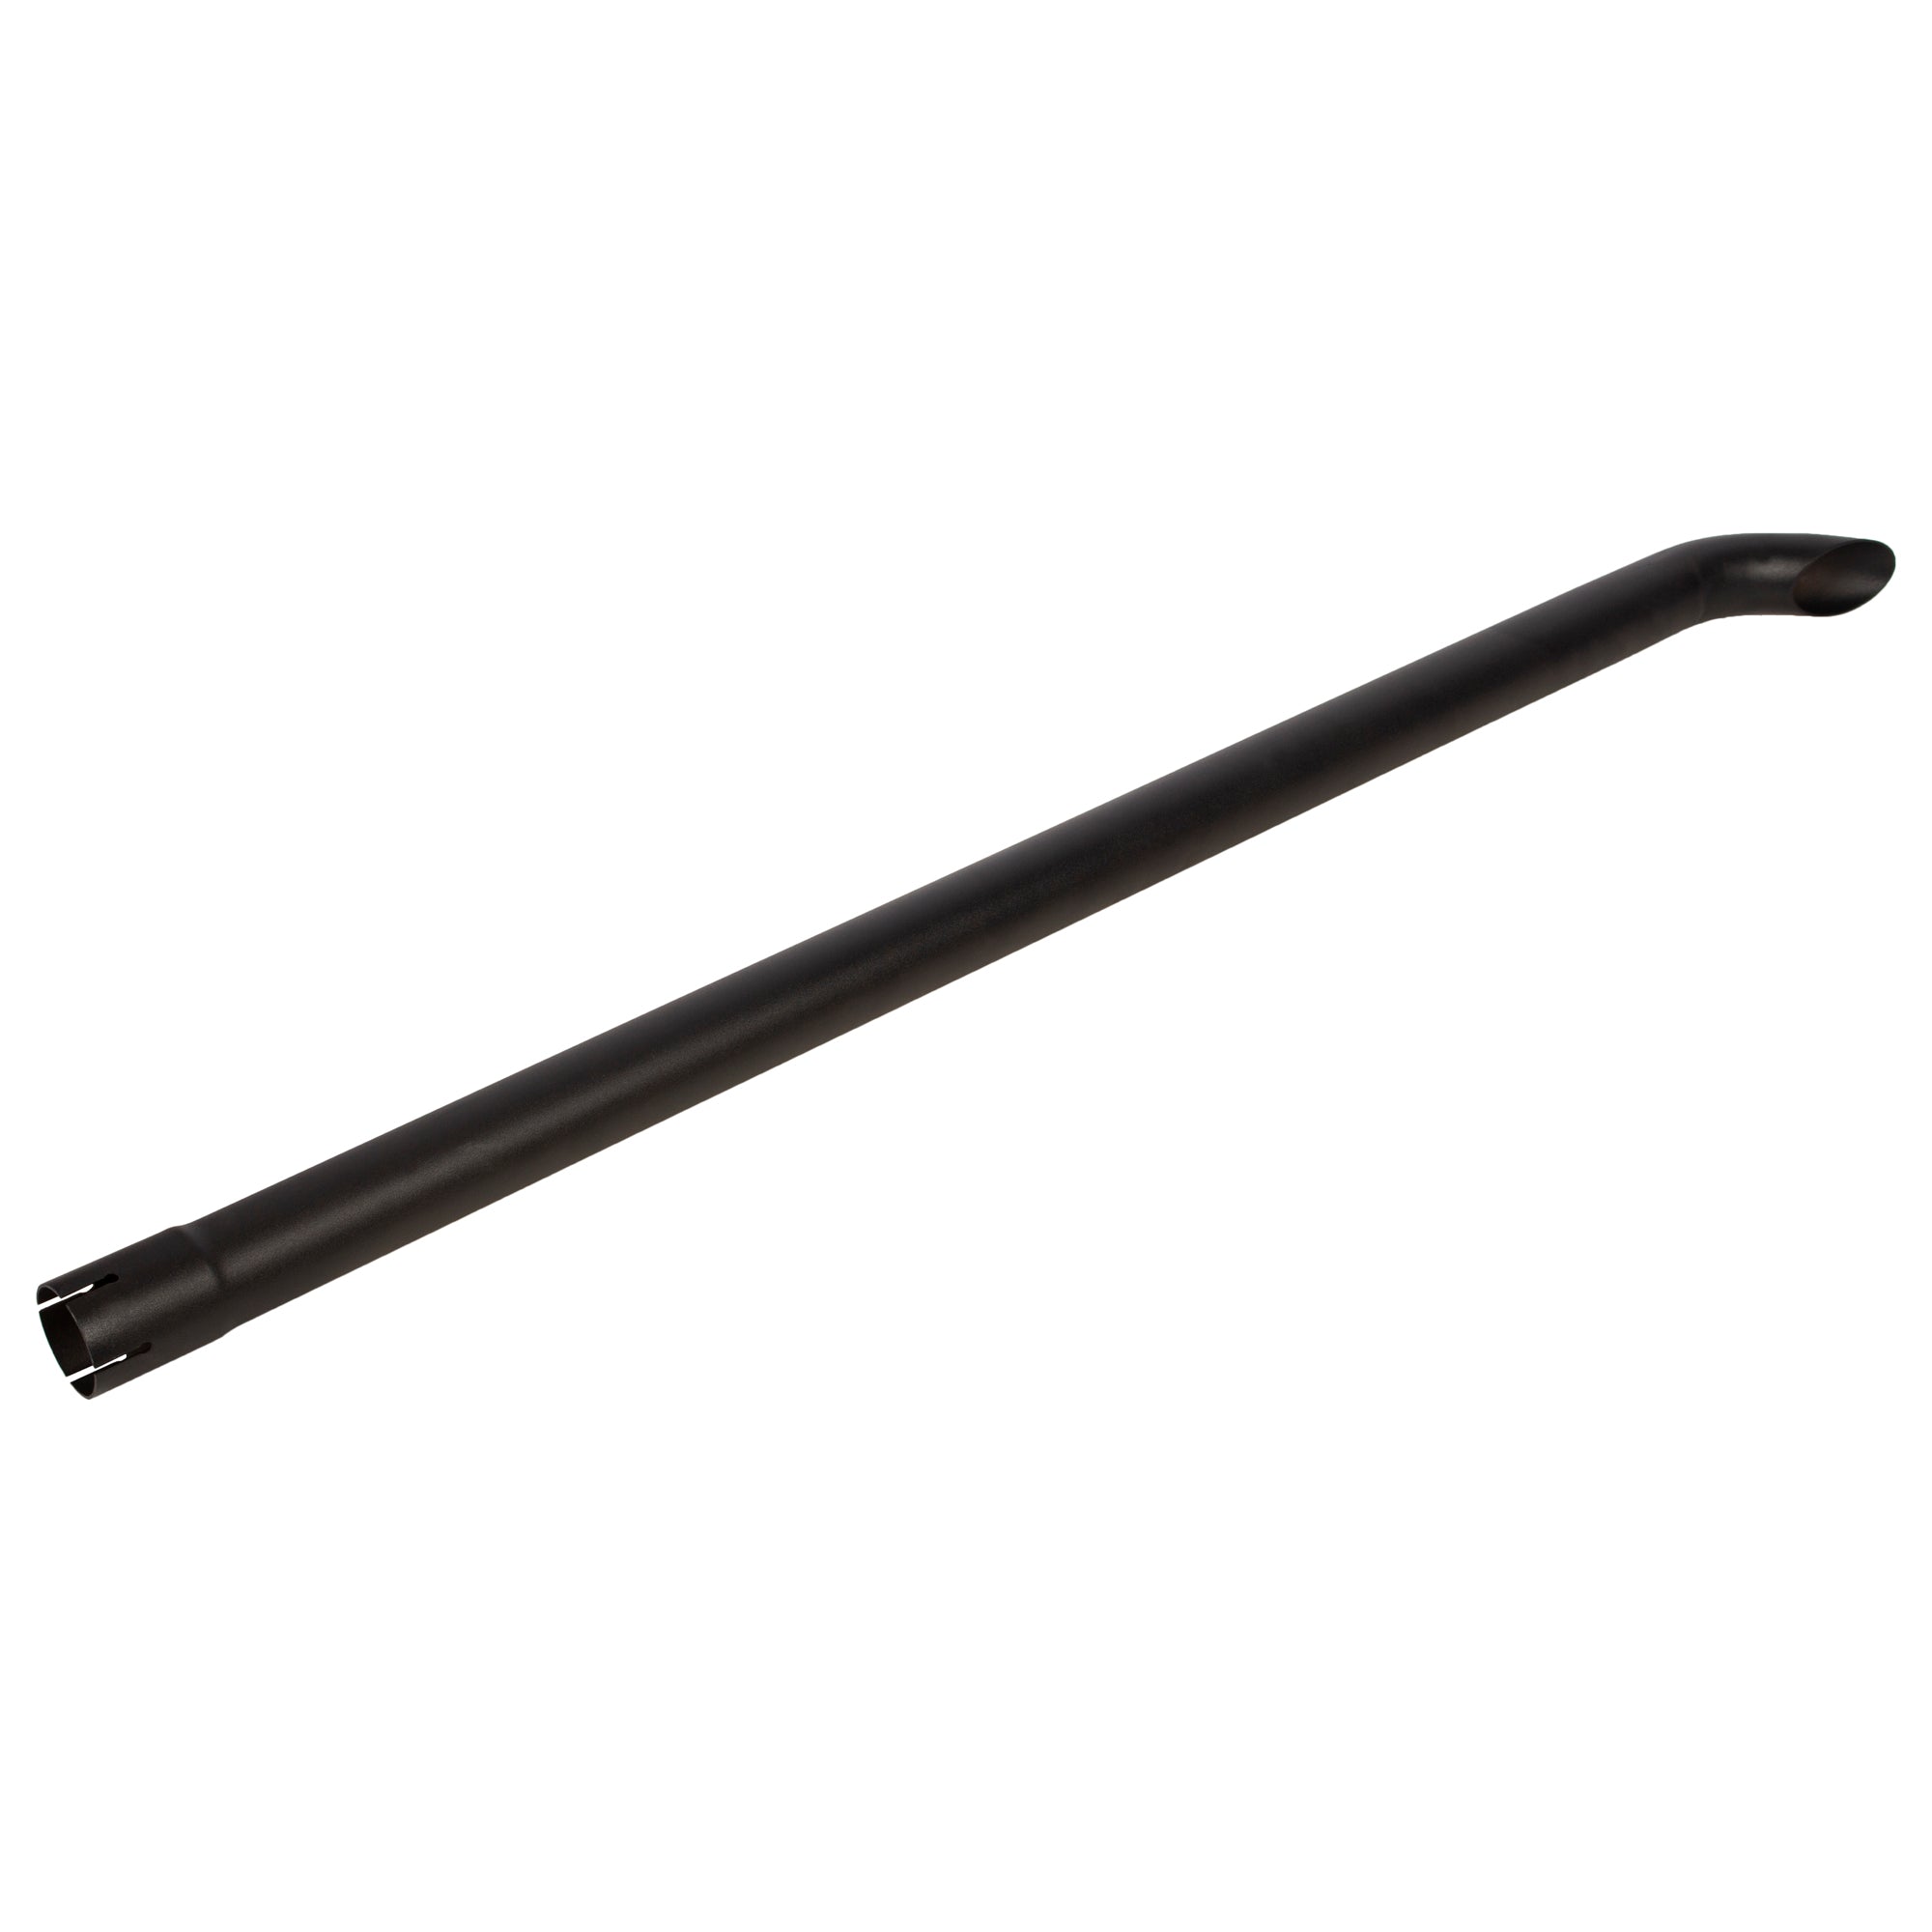 Exhaust Pipe Replacement for UNIVERSAL Bended End Pipe Black 2" x 48"